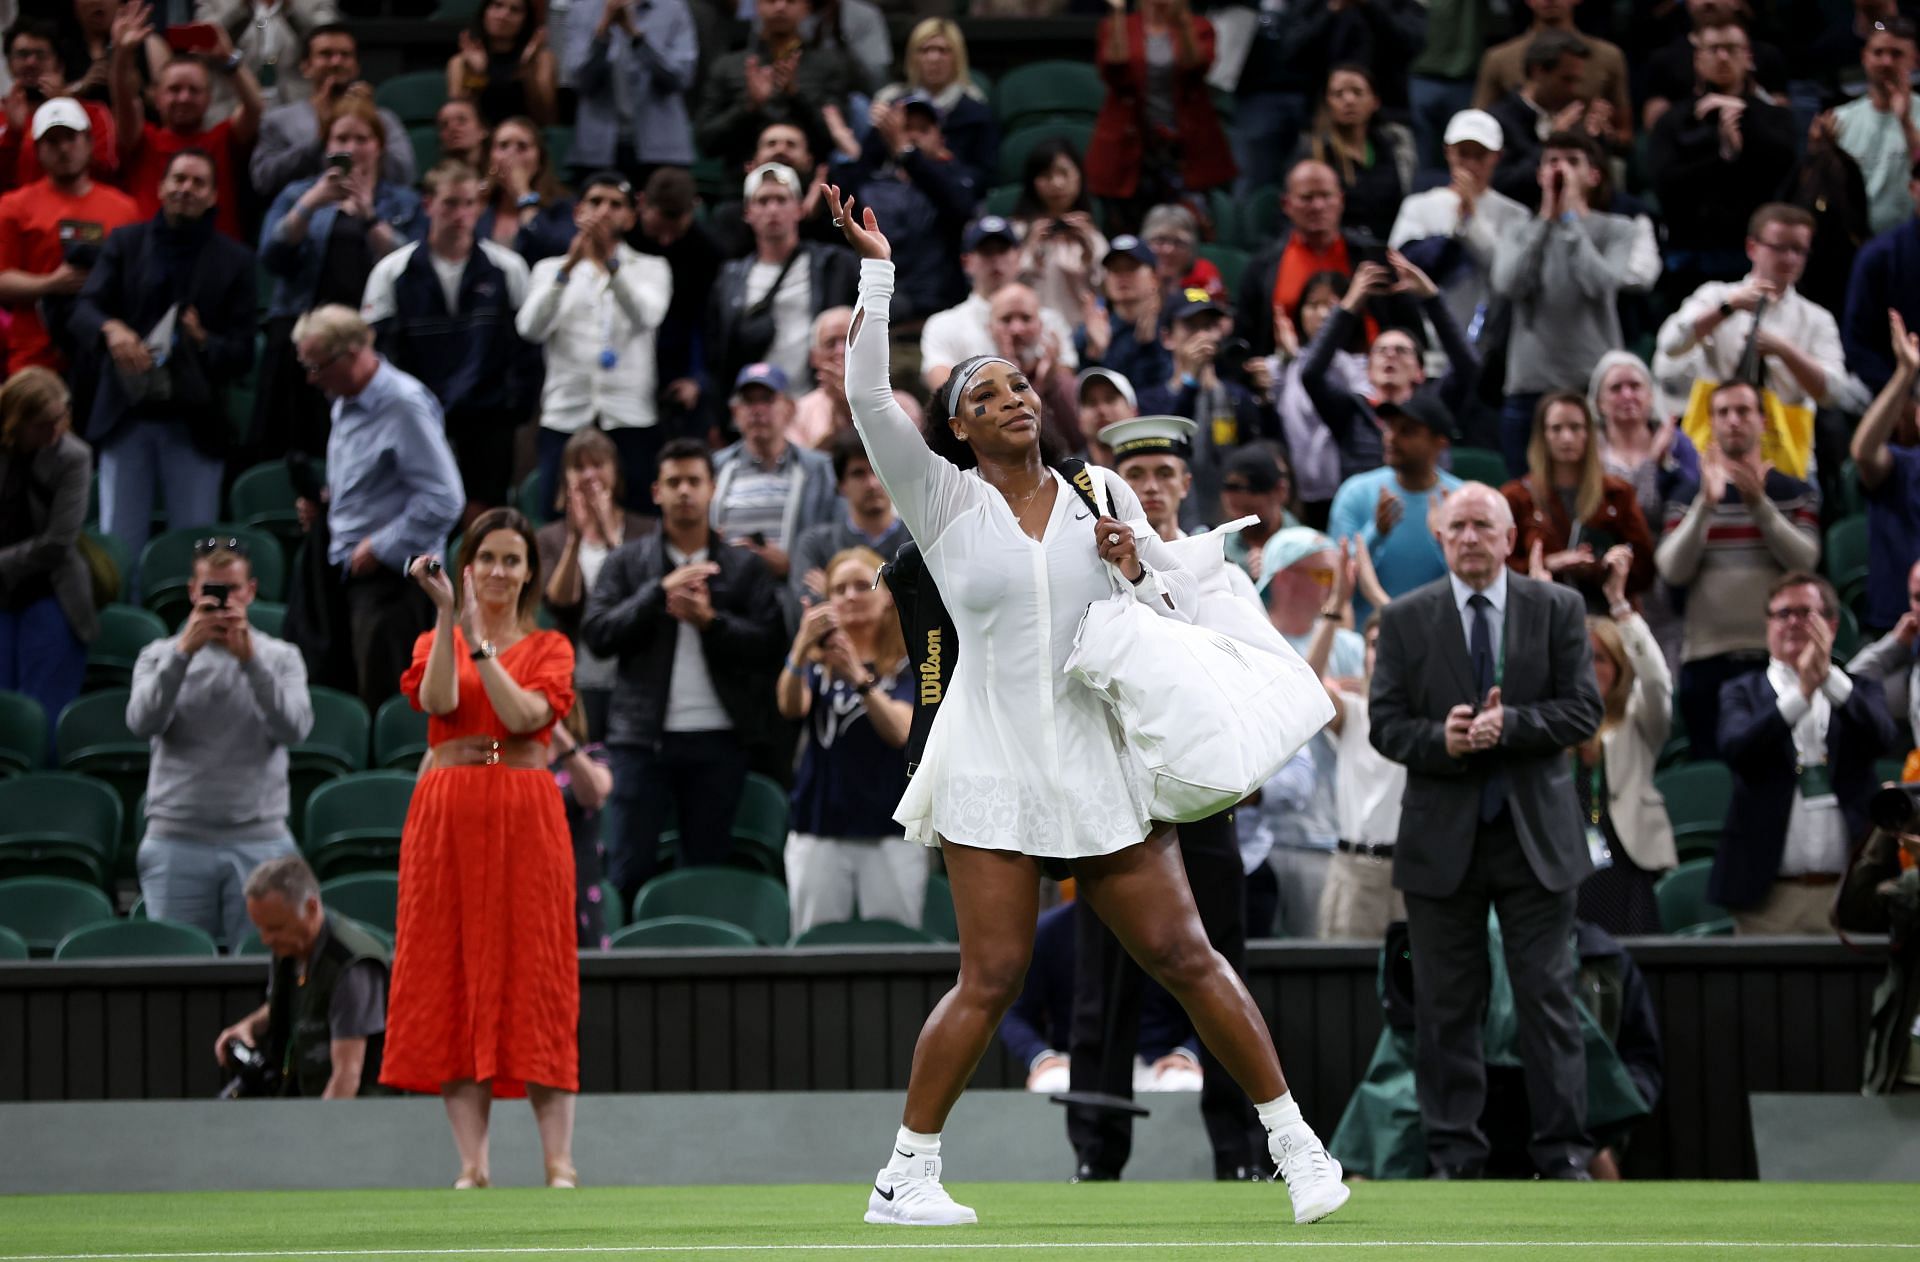 Serena Williams acknowledges the crowd after her first-round loss.